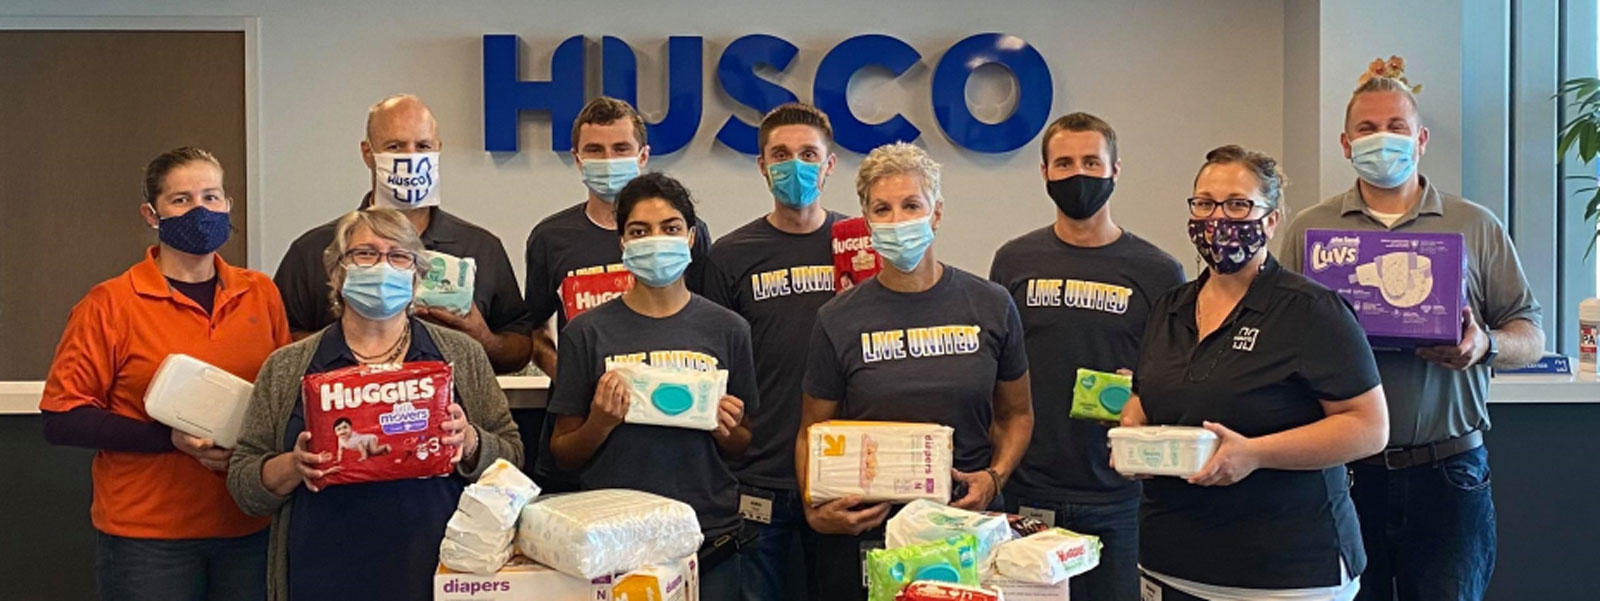 group of Husco employees at a diaper collection drive during their workplace campaign